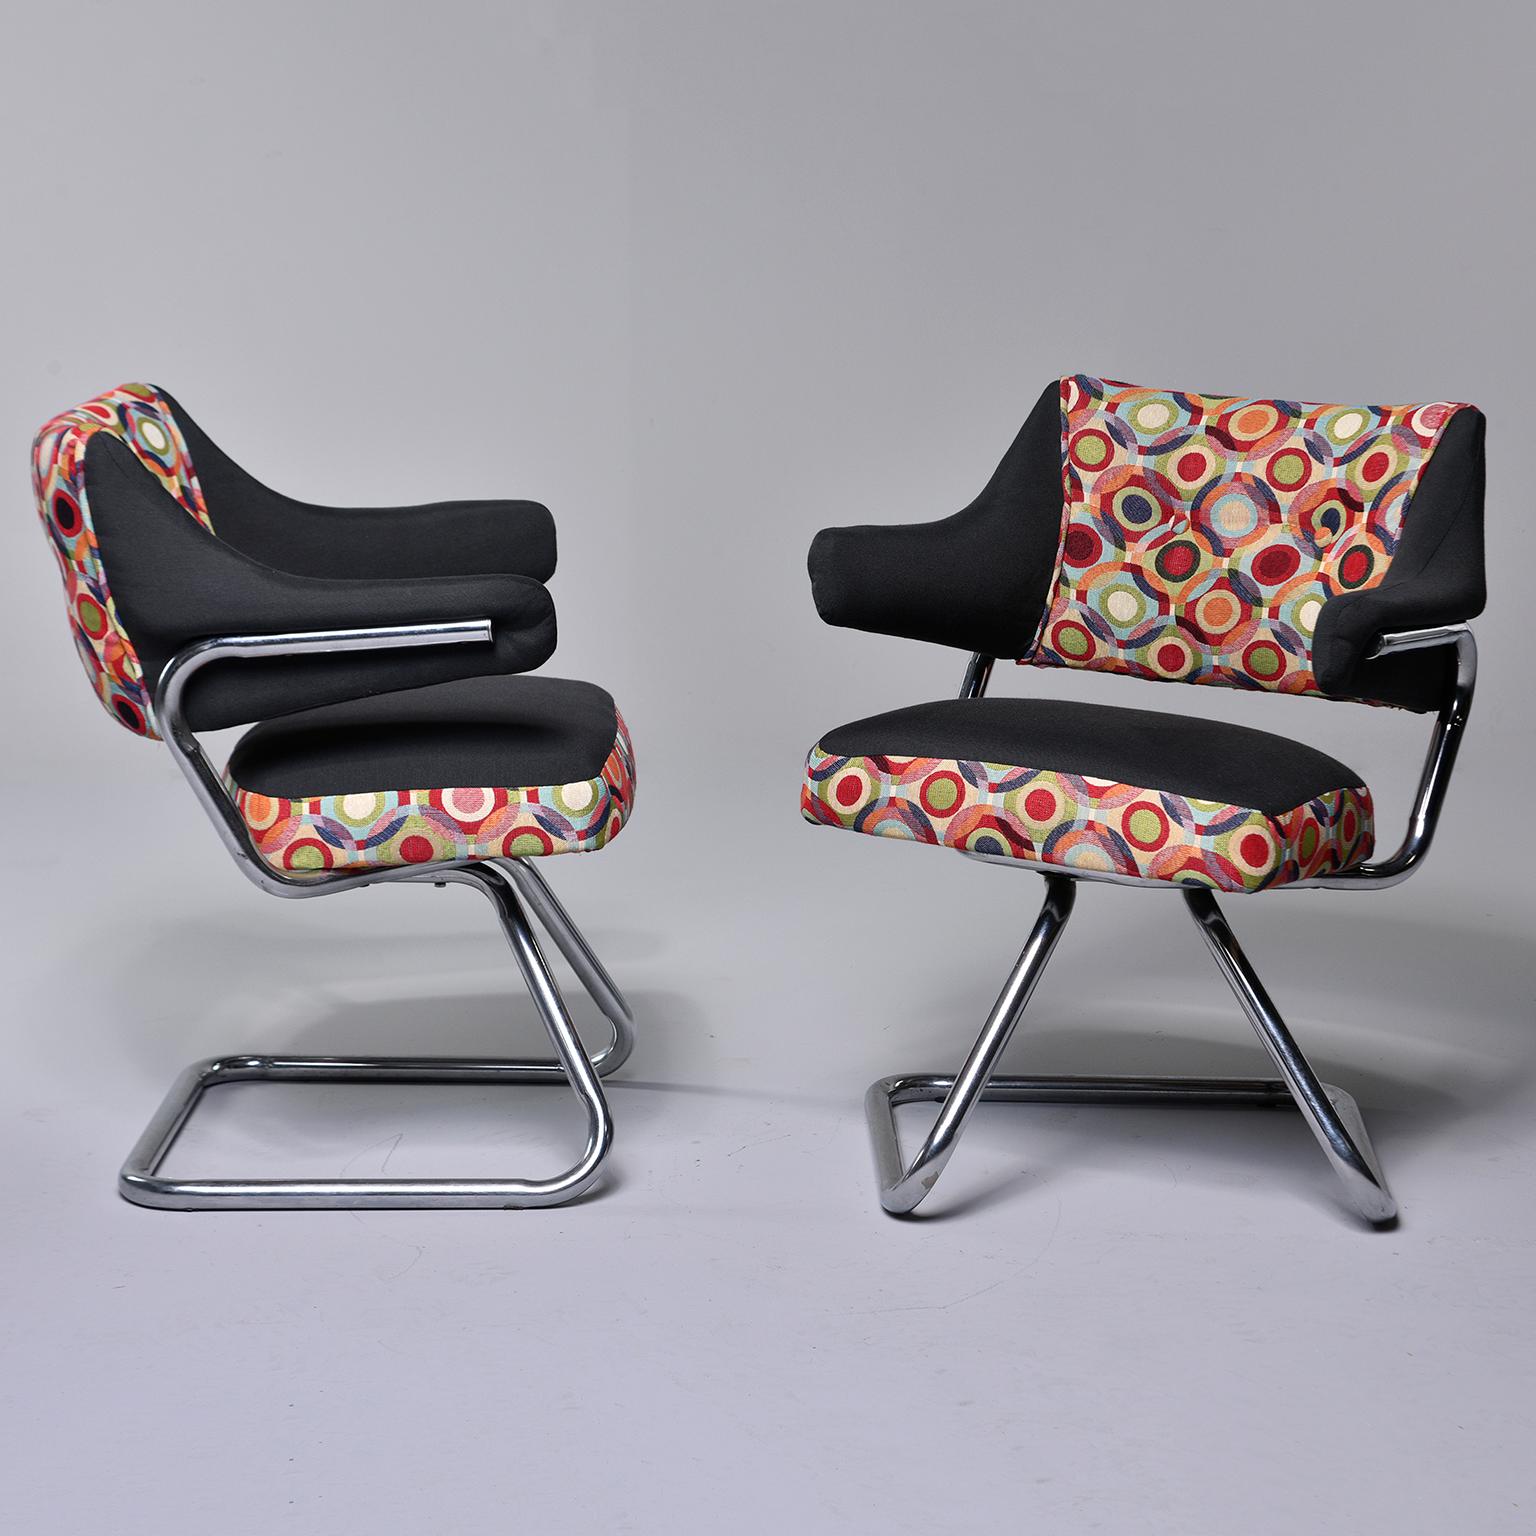 Upholstery Pair Italian Midcentury Swivel Chairs With Chrome Base and Missoni Style Fabric For Sale